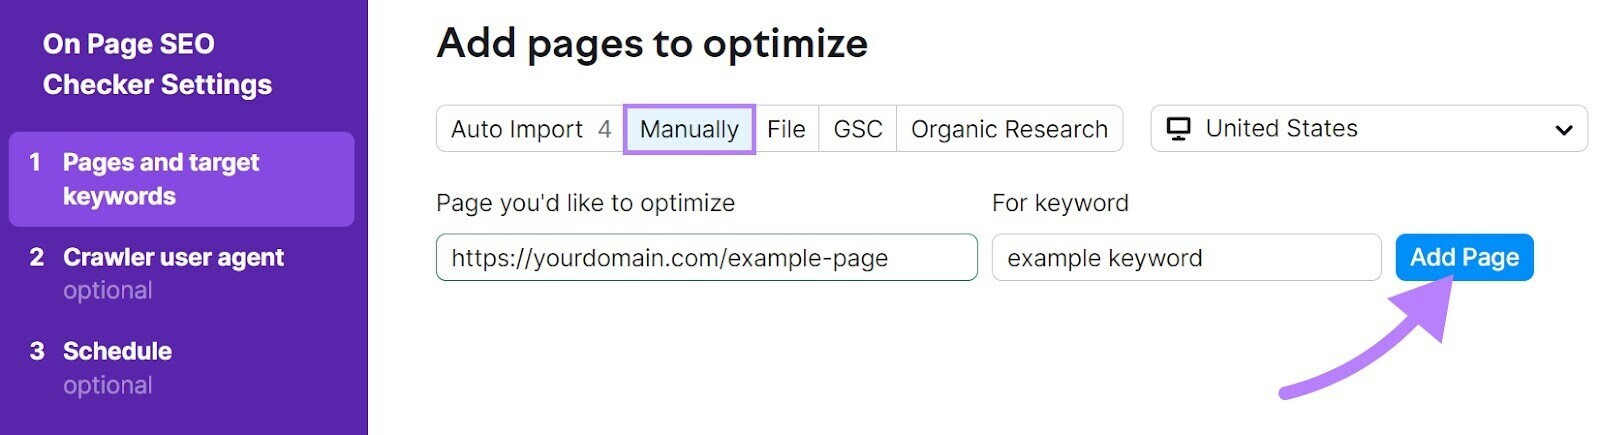 "Add pages to optimize - Manually" window in On Page SEO Checker Settings